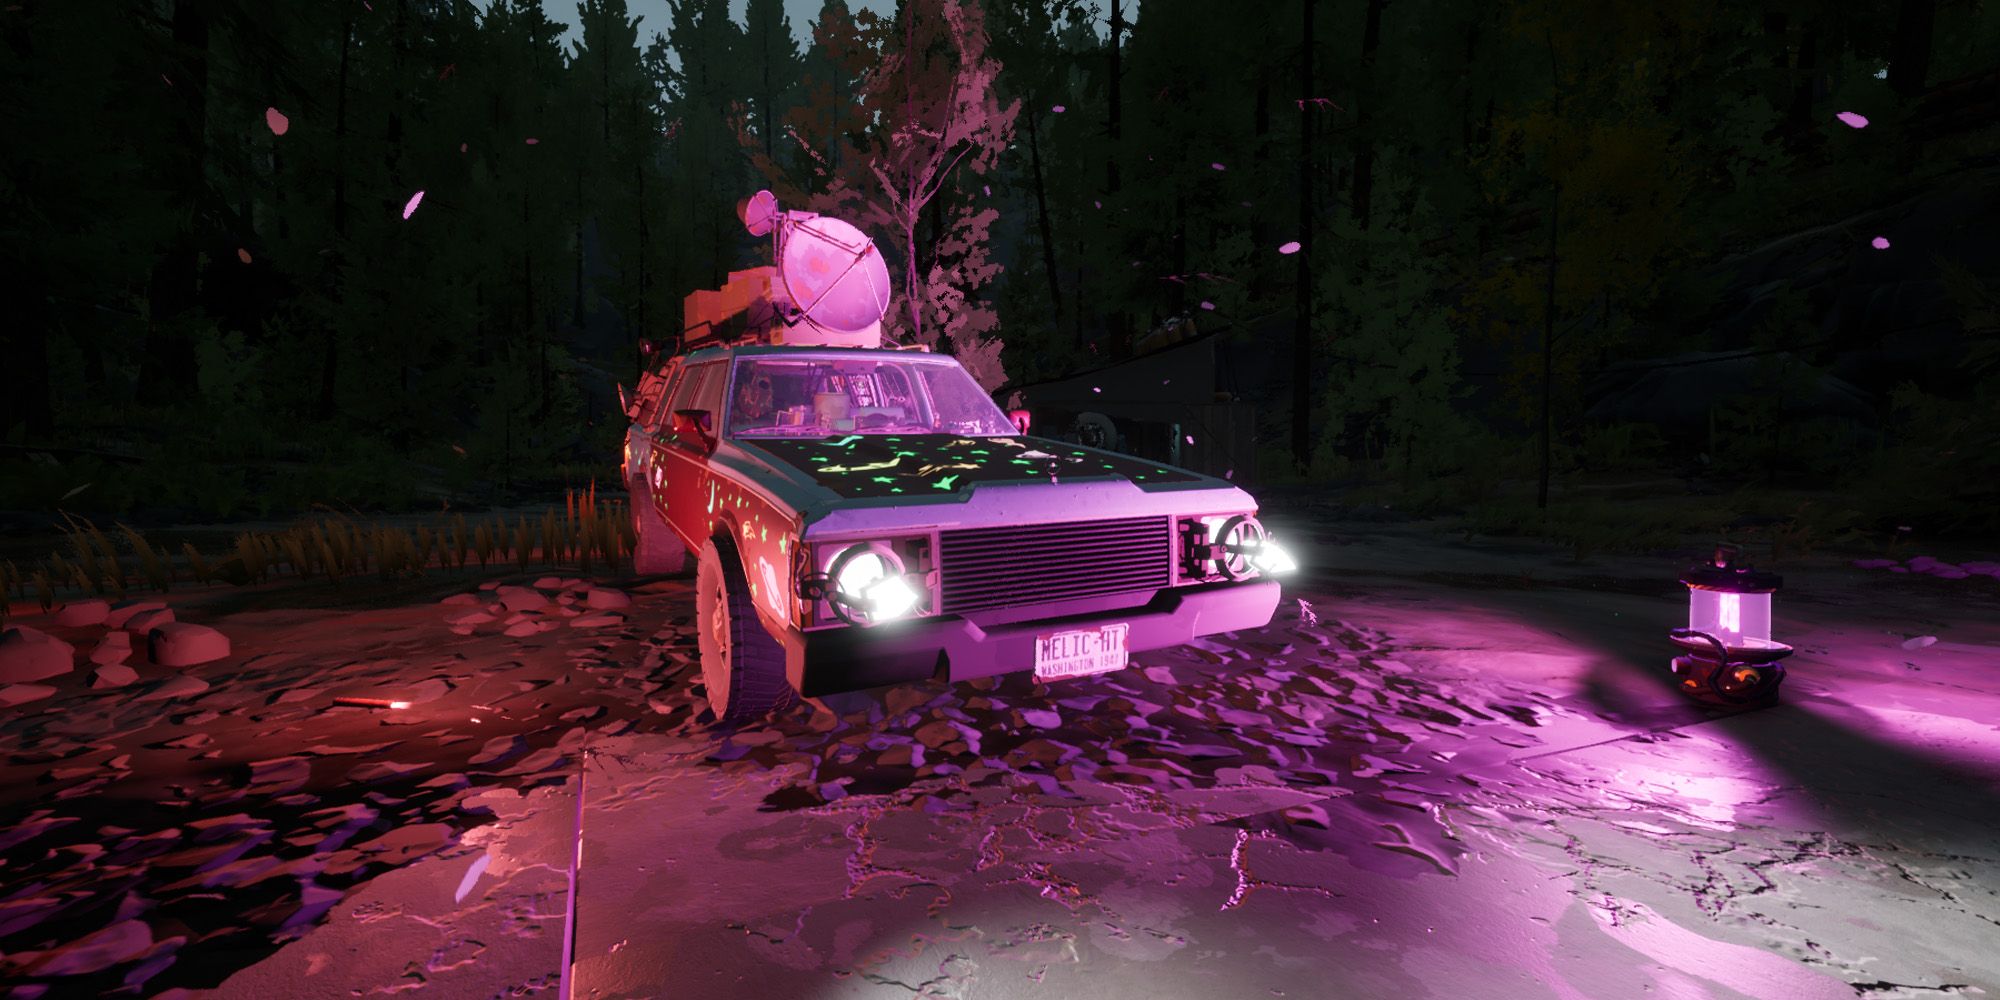 A picture of Pacific Drive showing Bio Headlights, a road flare, and the Biolantern